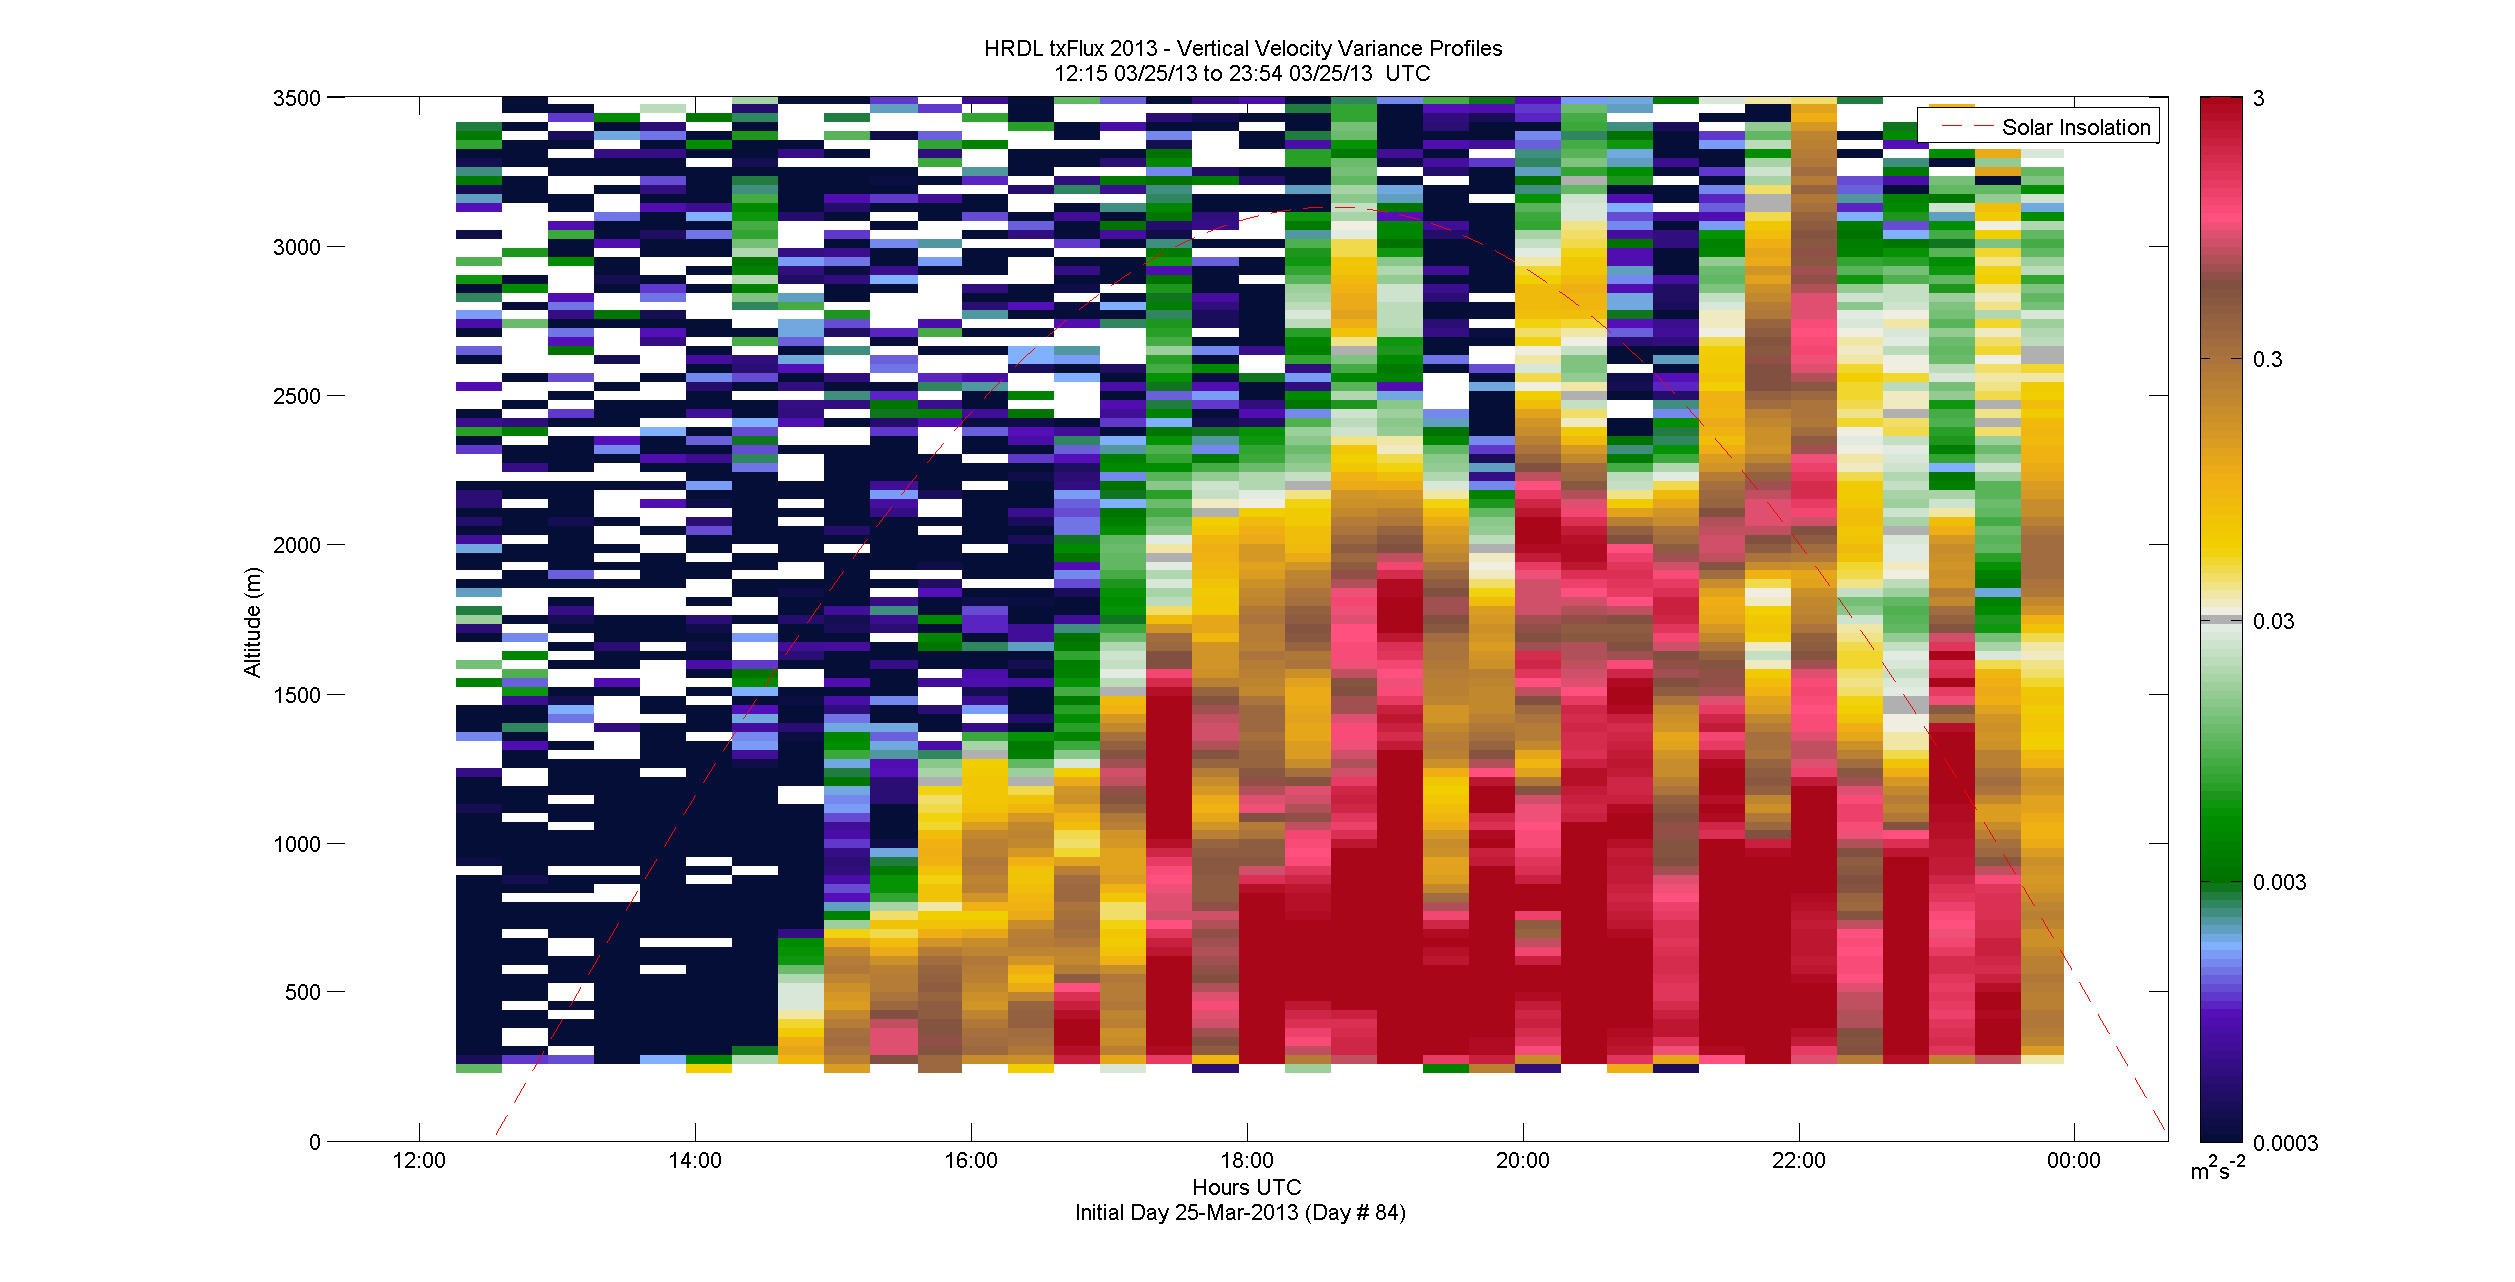 HRDL vertical variance profile - March 25 pm